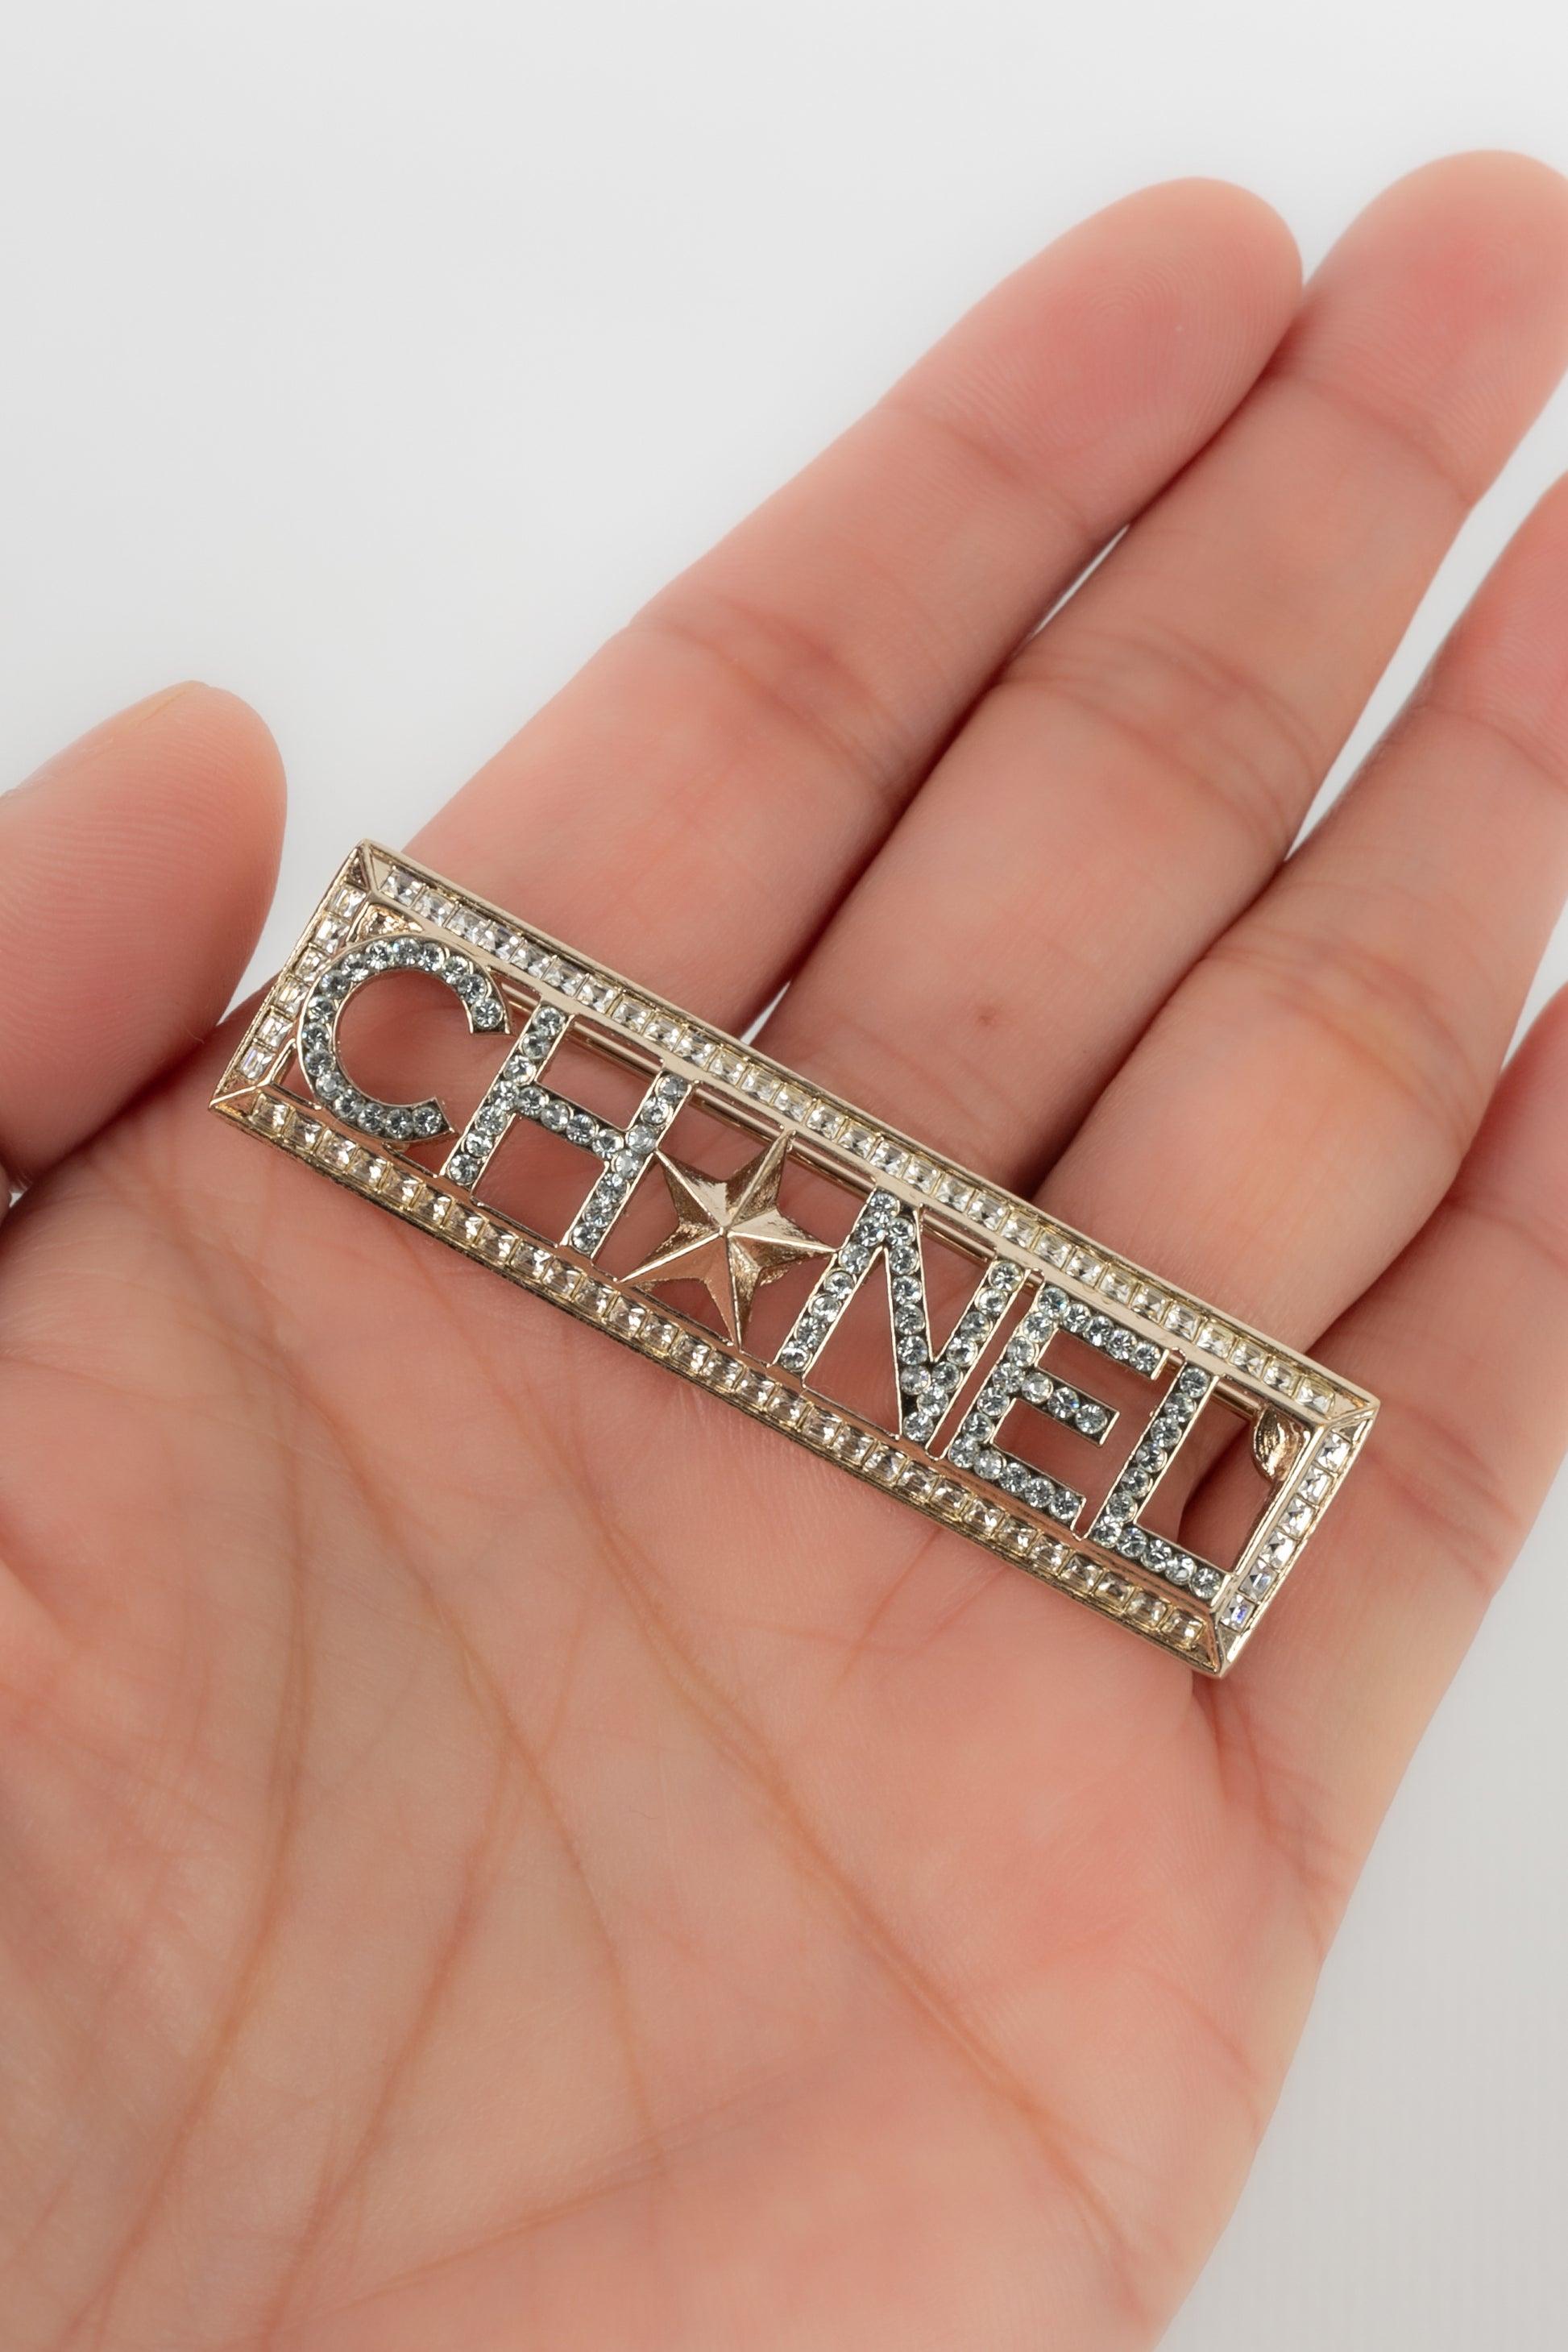 Chanel Champagne Metal Openwork Brooch Ornamented with Rhinestones, 2018 For Sale 2